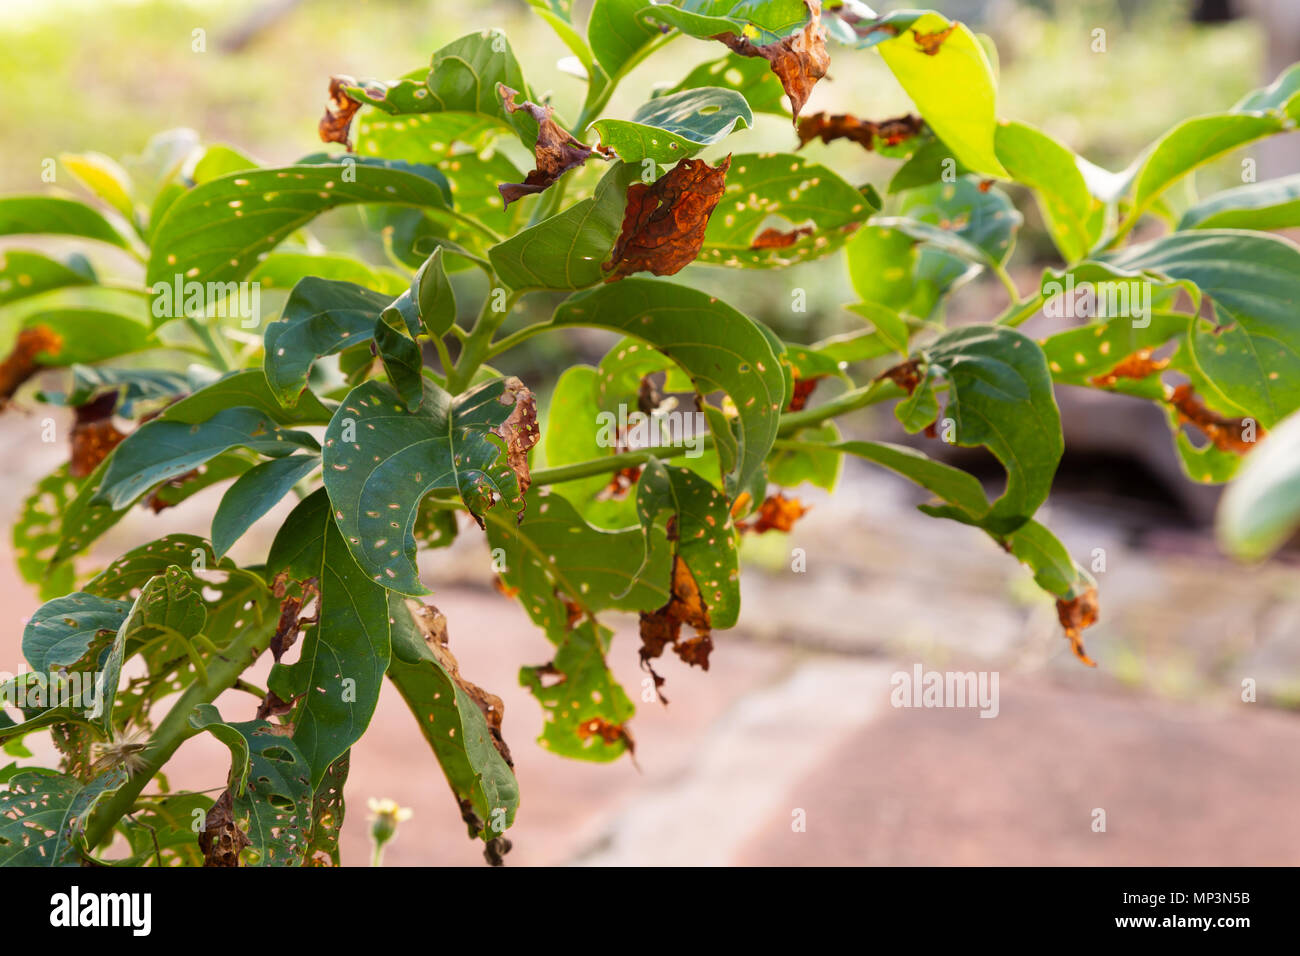 Avocado tree leaves covered with holes, young growing plant spot disease, Asuncion, Paraguay Stock Photo